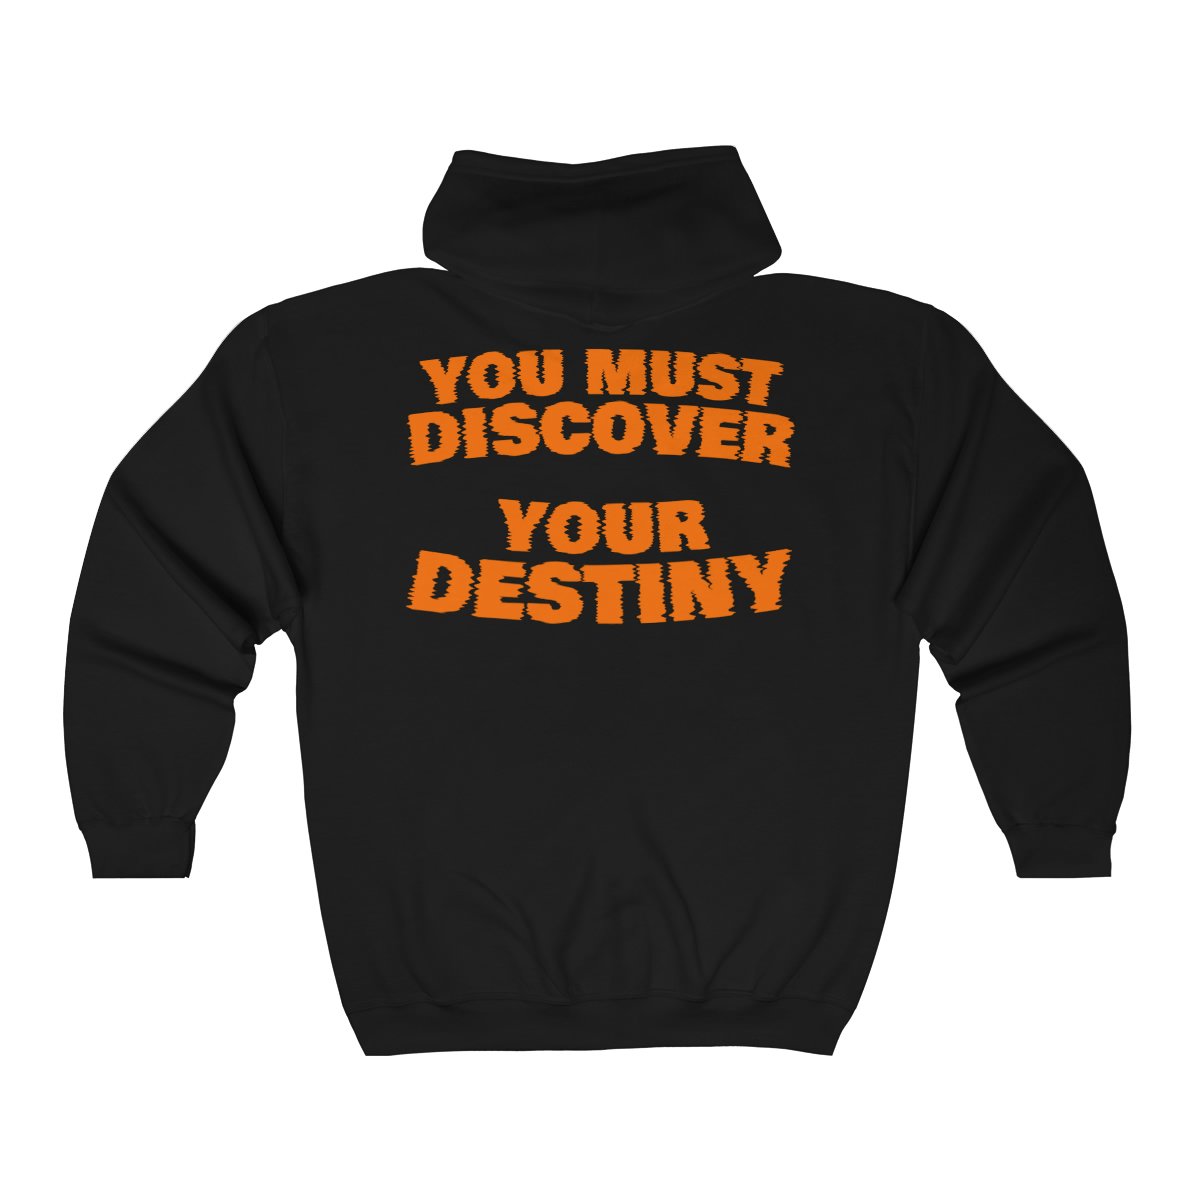 Brotality – Prisoners of the Abyss Full Zip Hooded Sweatshirt